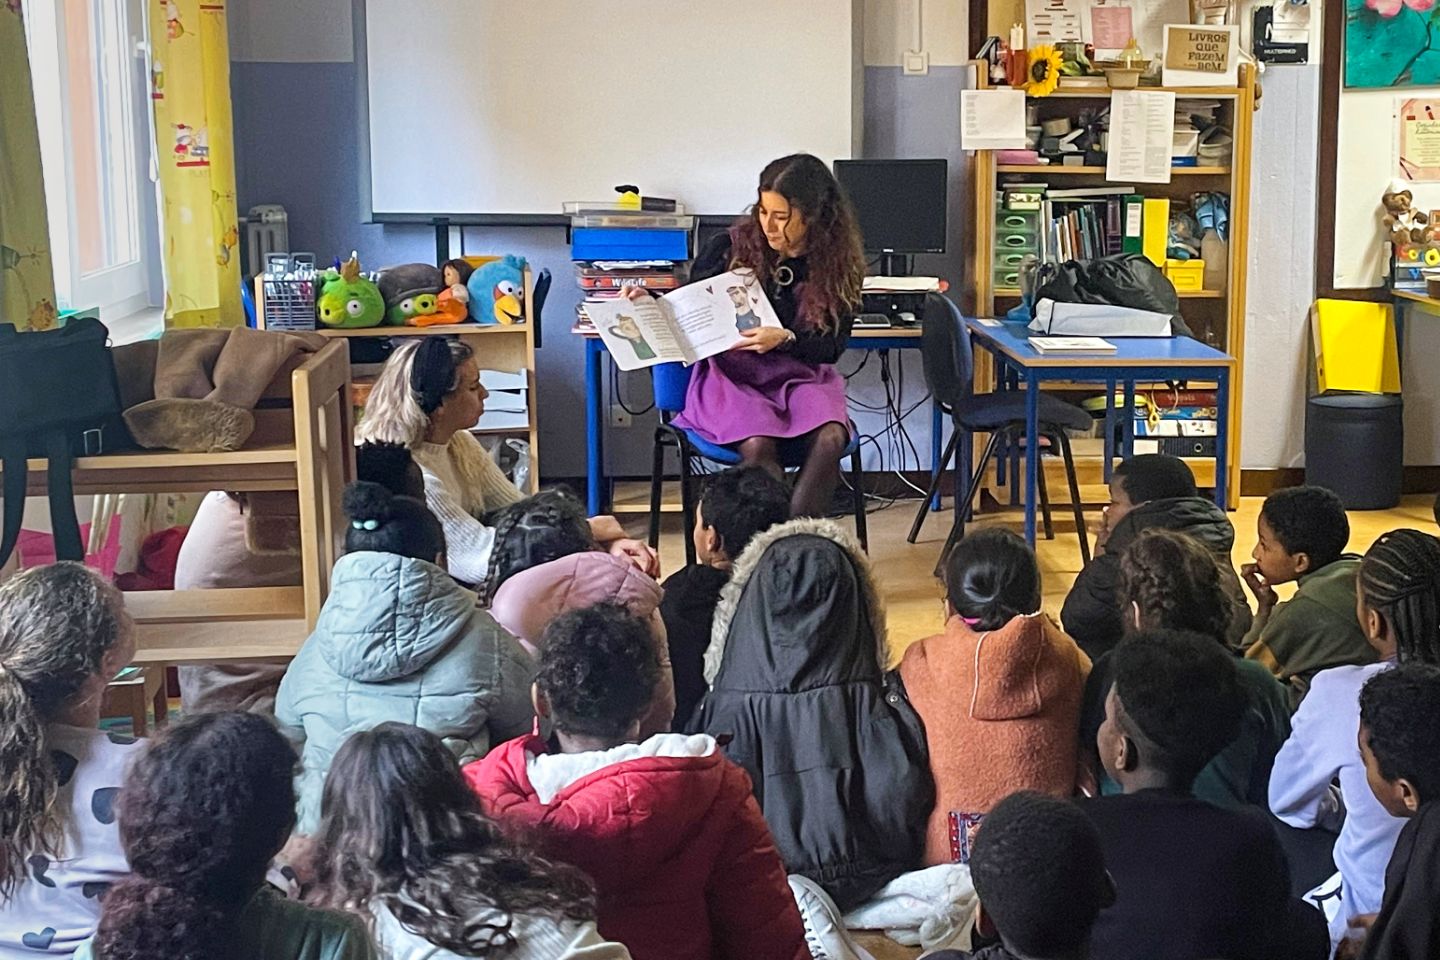 A school class with a person in front presenting a book